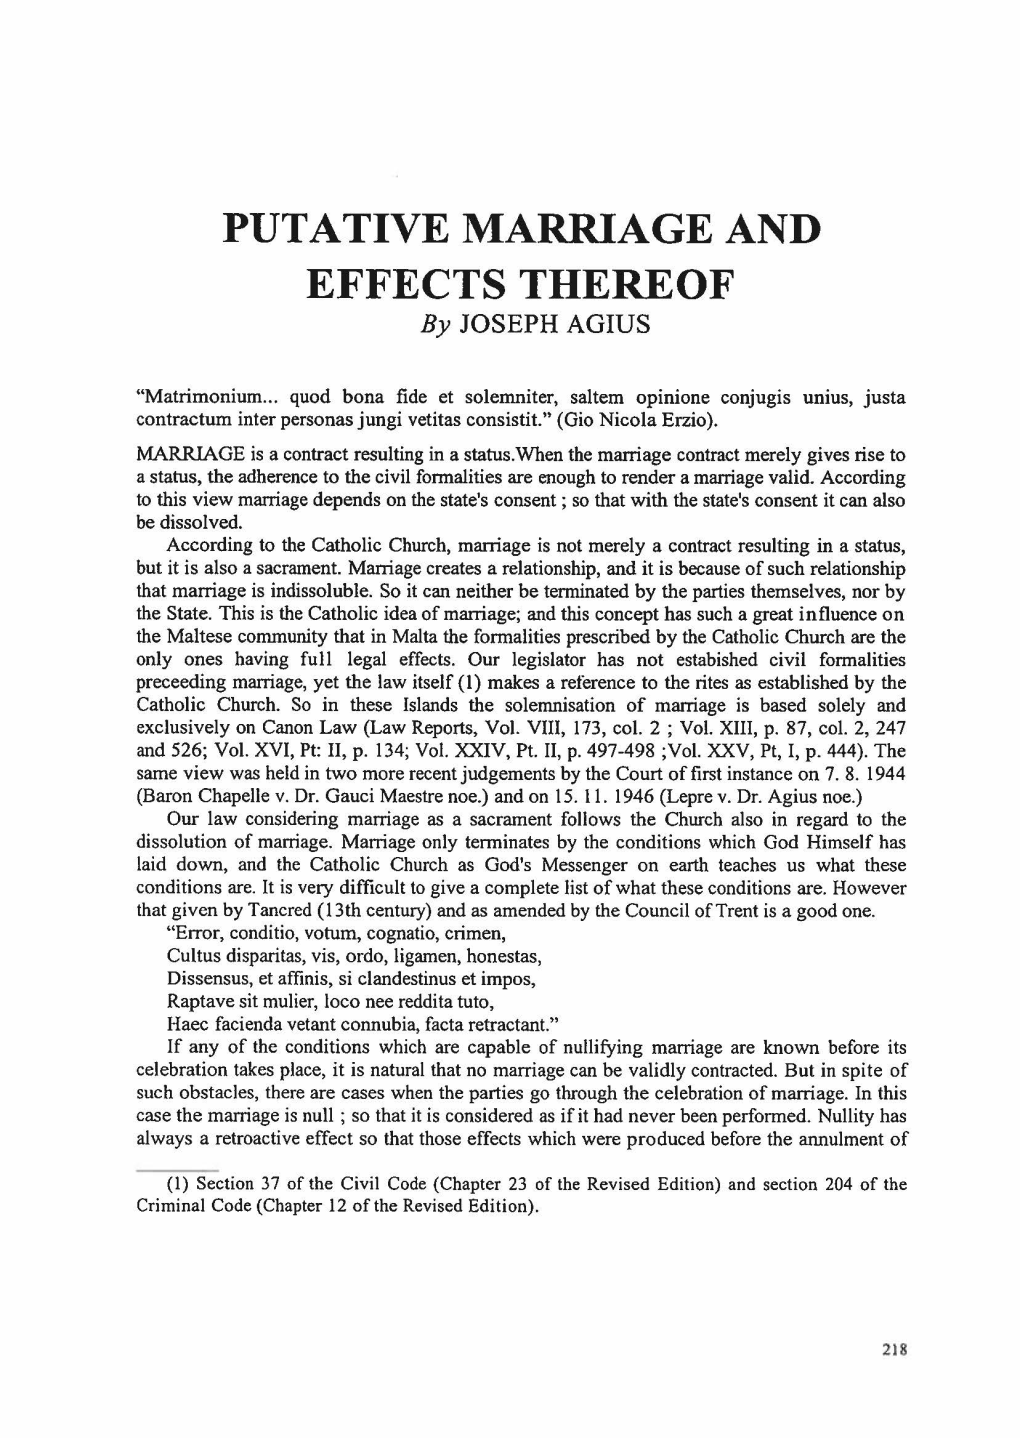 PUTATIVE MARRIAGE and EFFECTS THEREOF by JOSEPH AGIUS